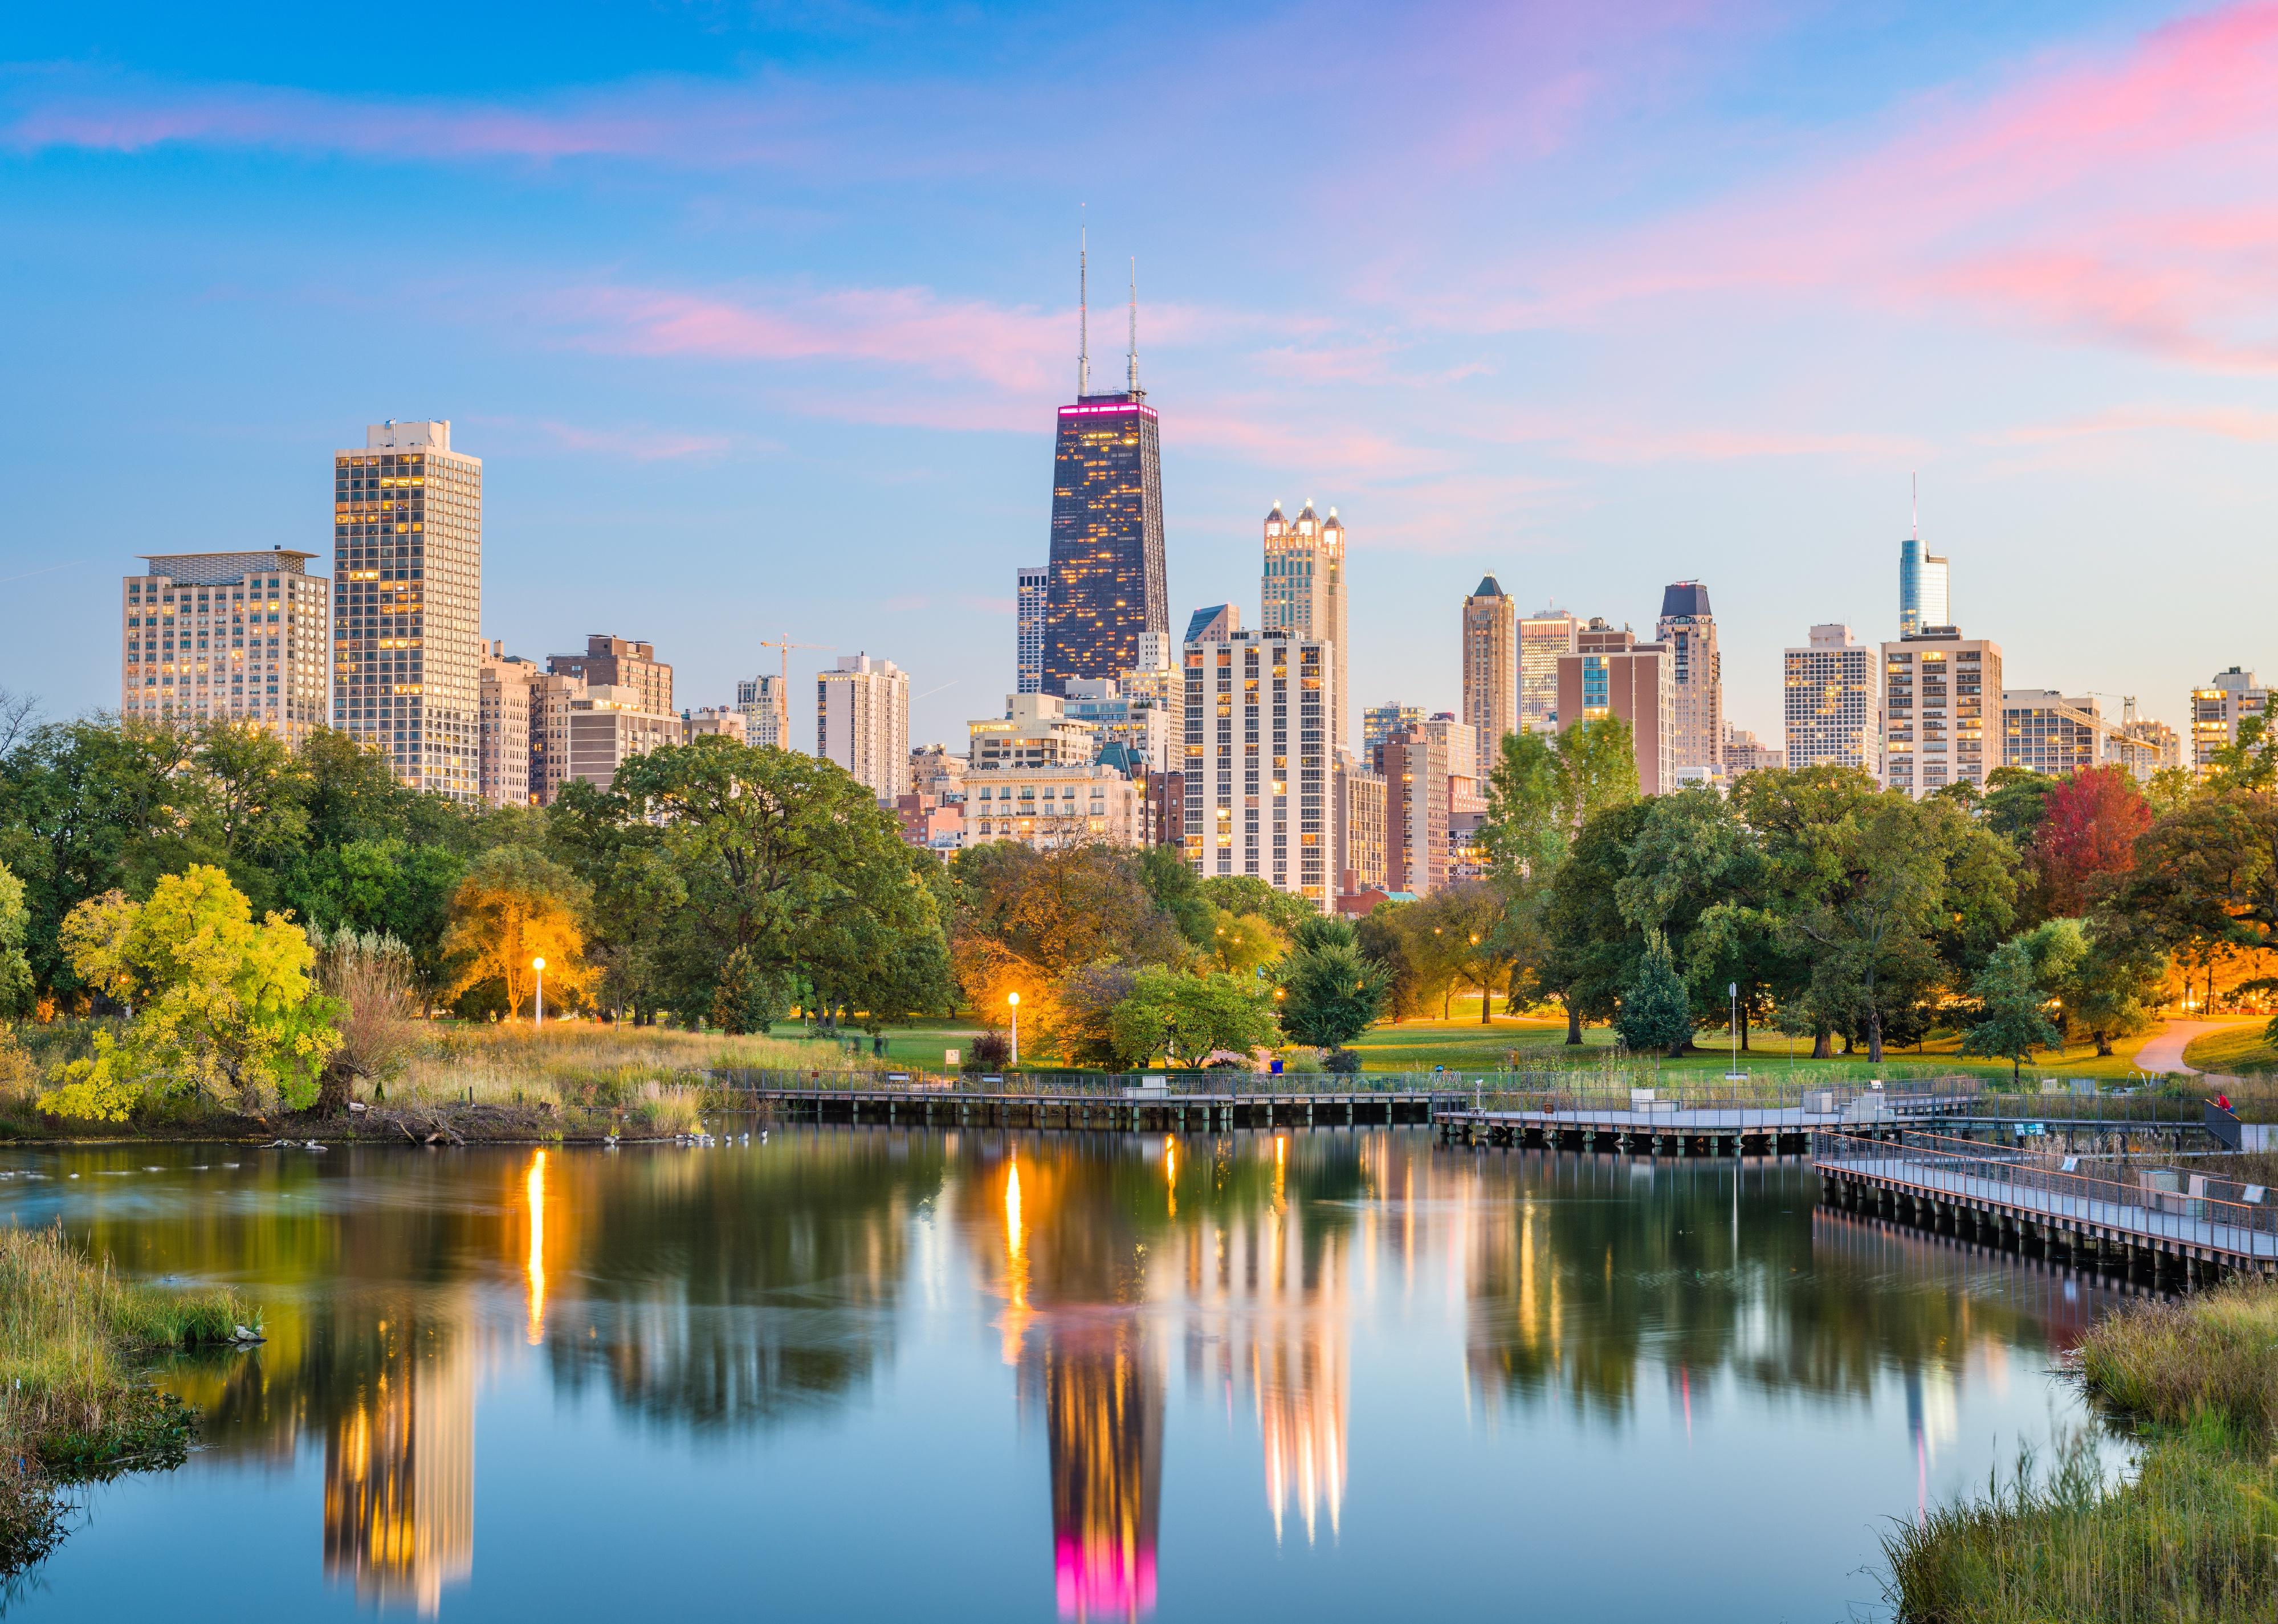 The Chicago skyline with a blue and pink sky in the background and reflective water in the foreground.